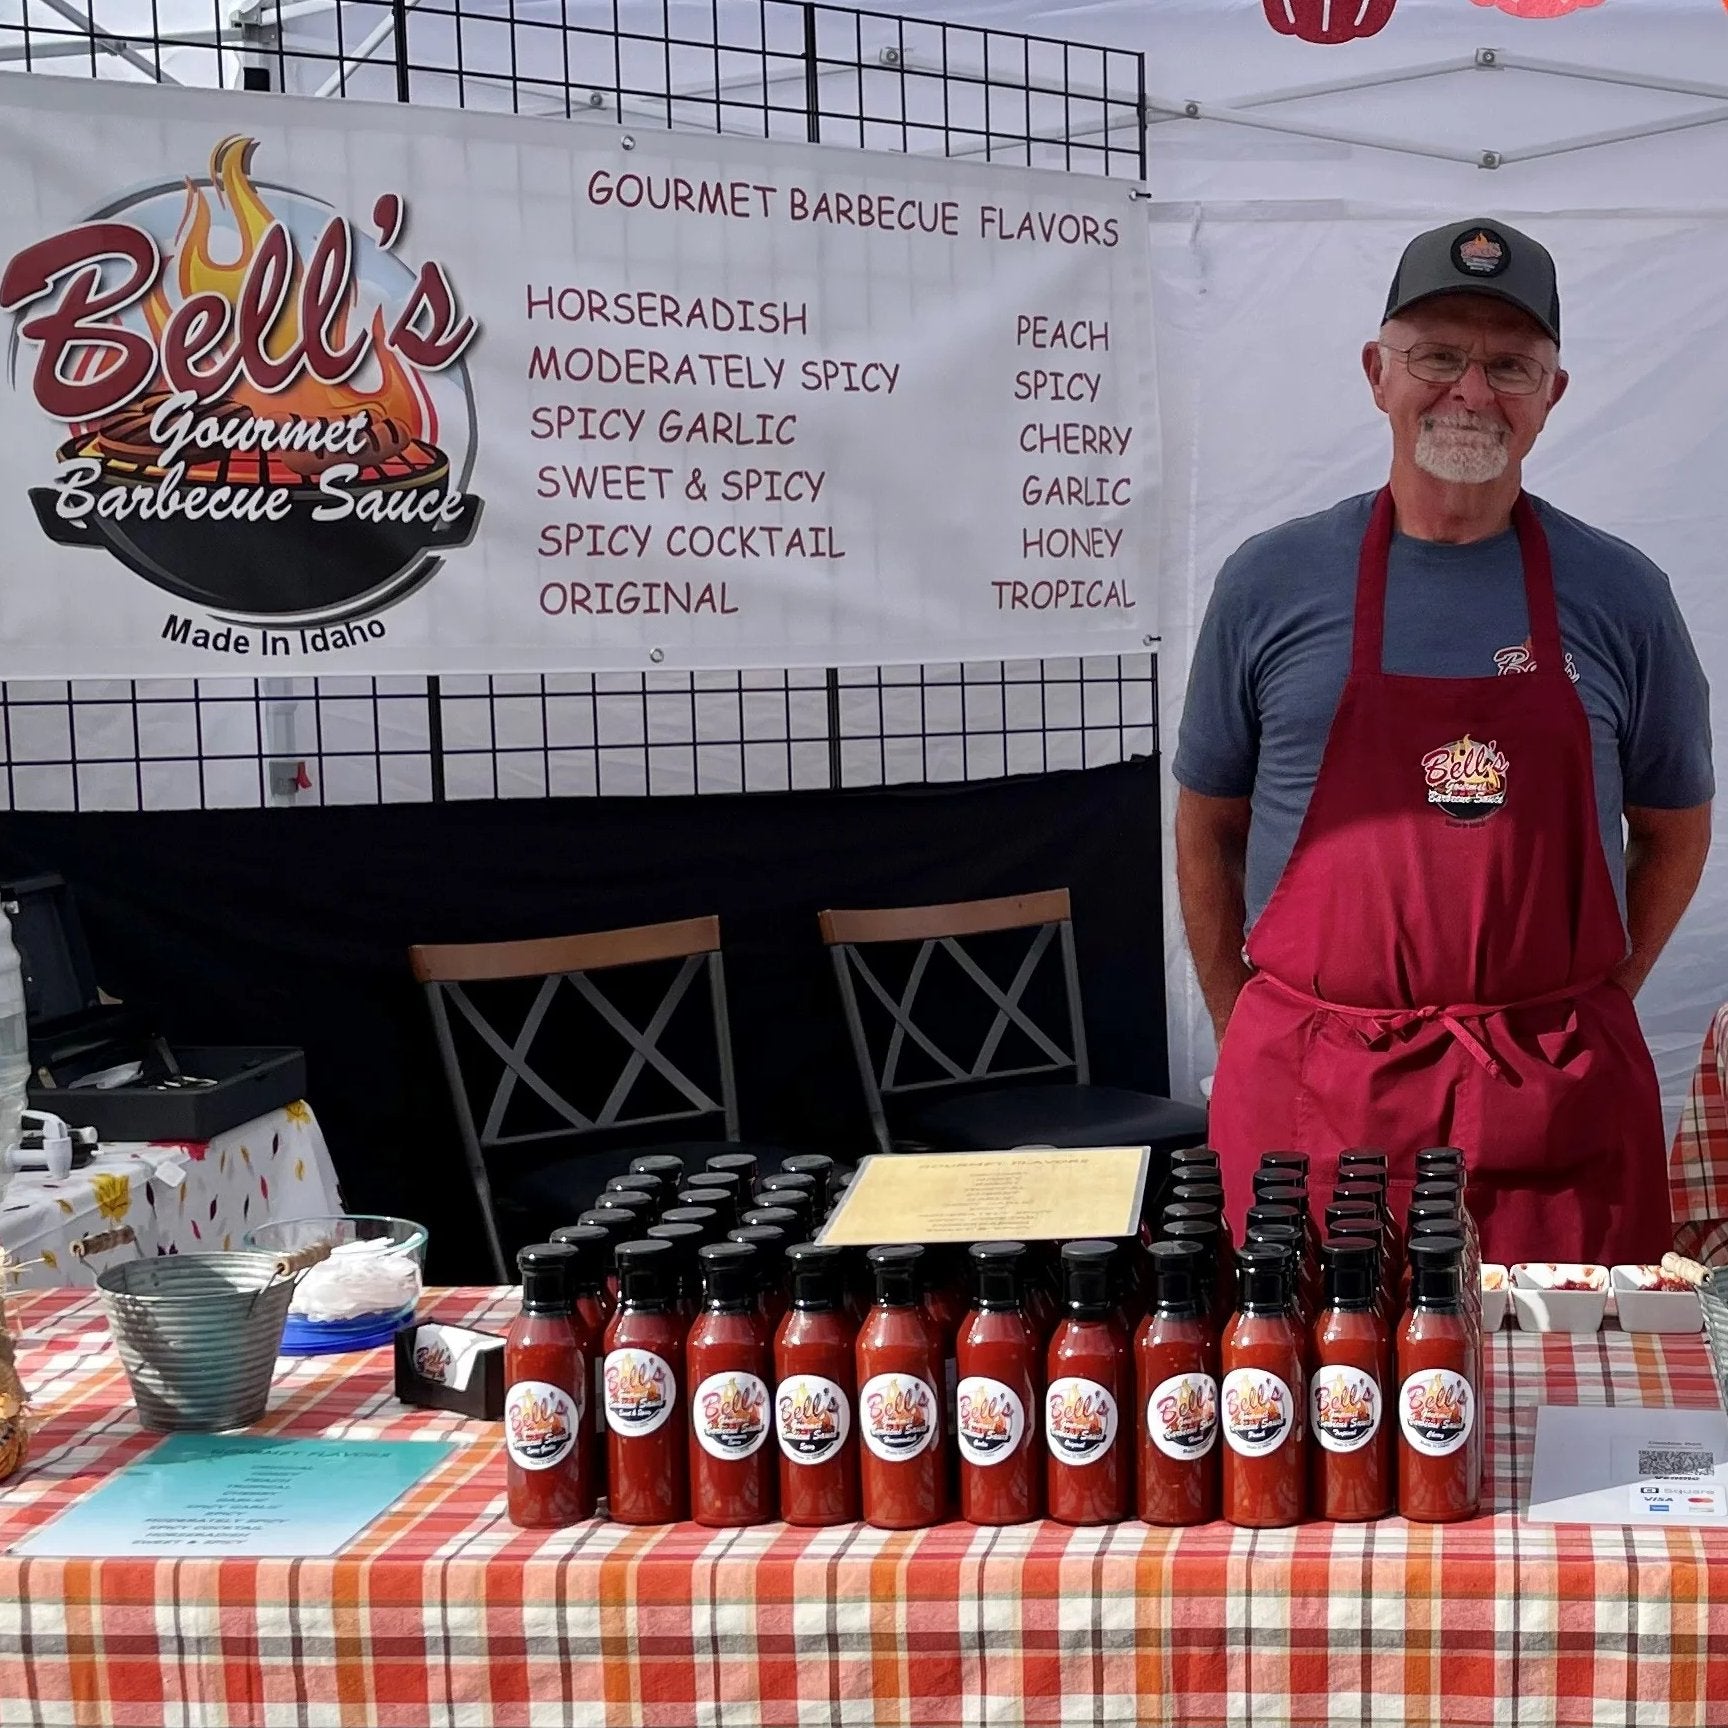 Bell's Homestyle Catering & BBQ Sauce